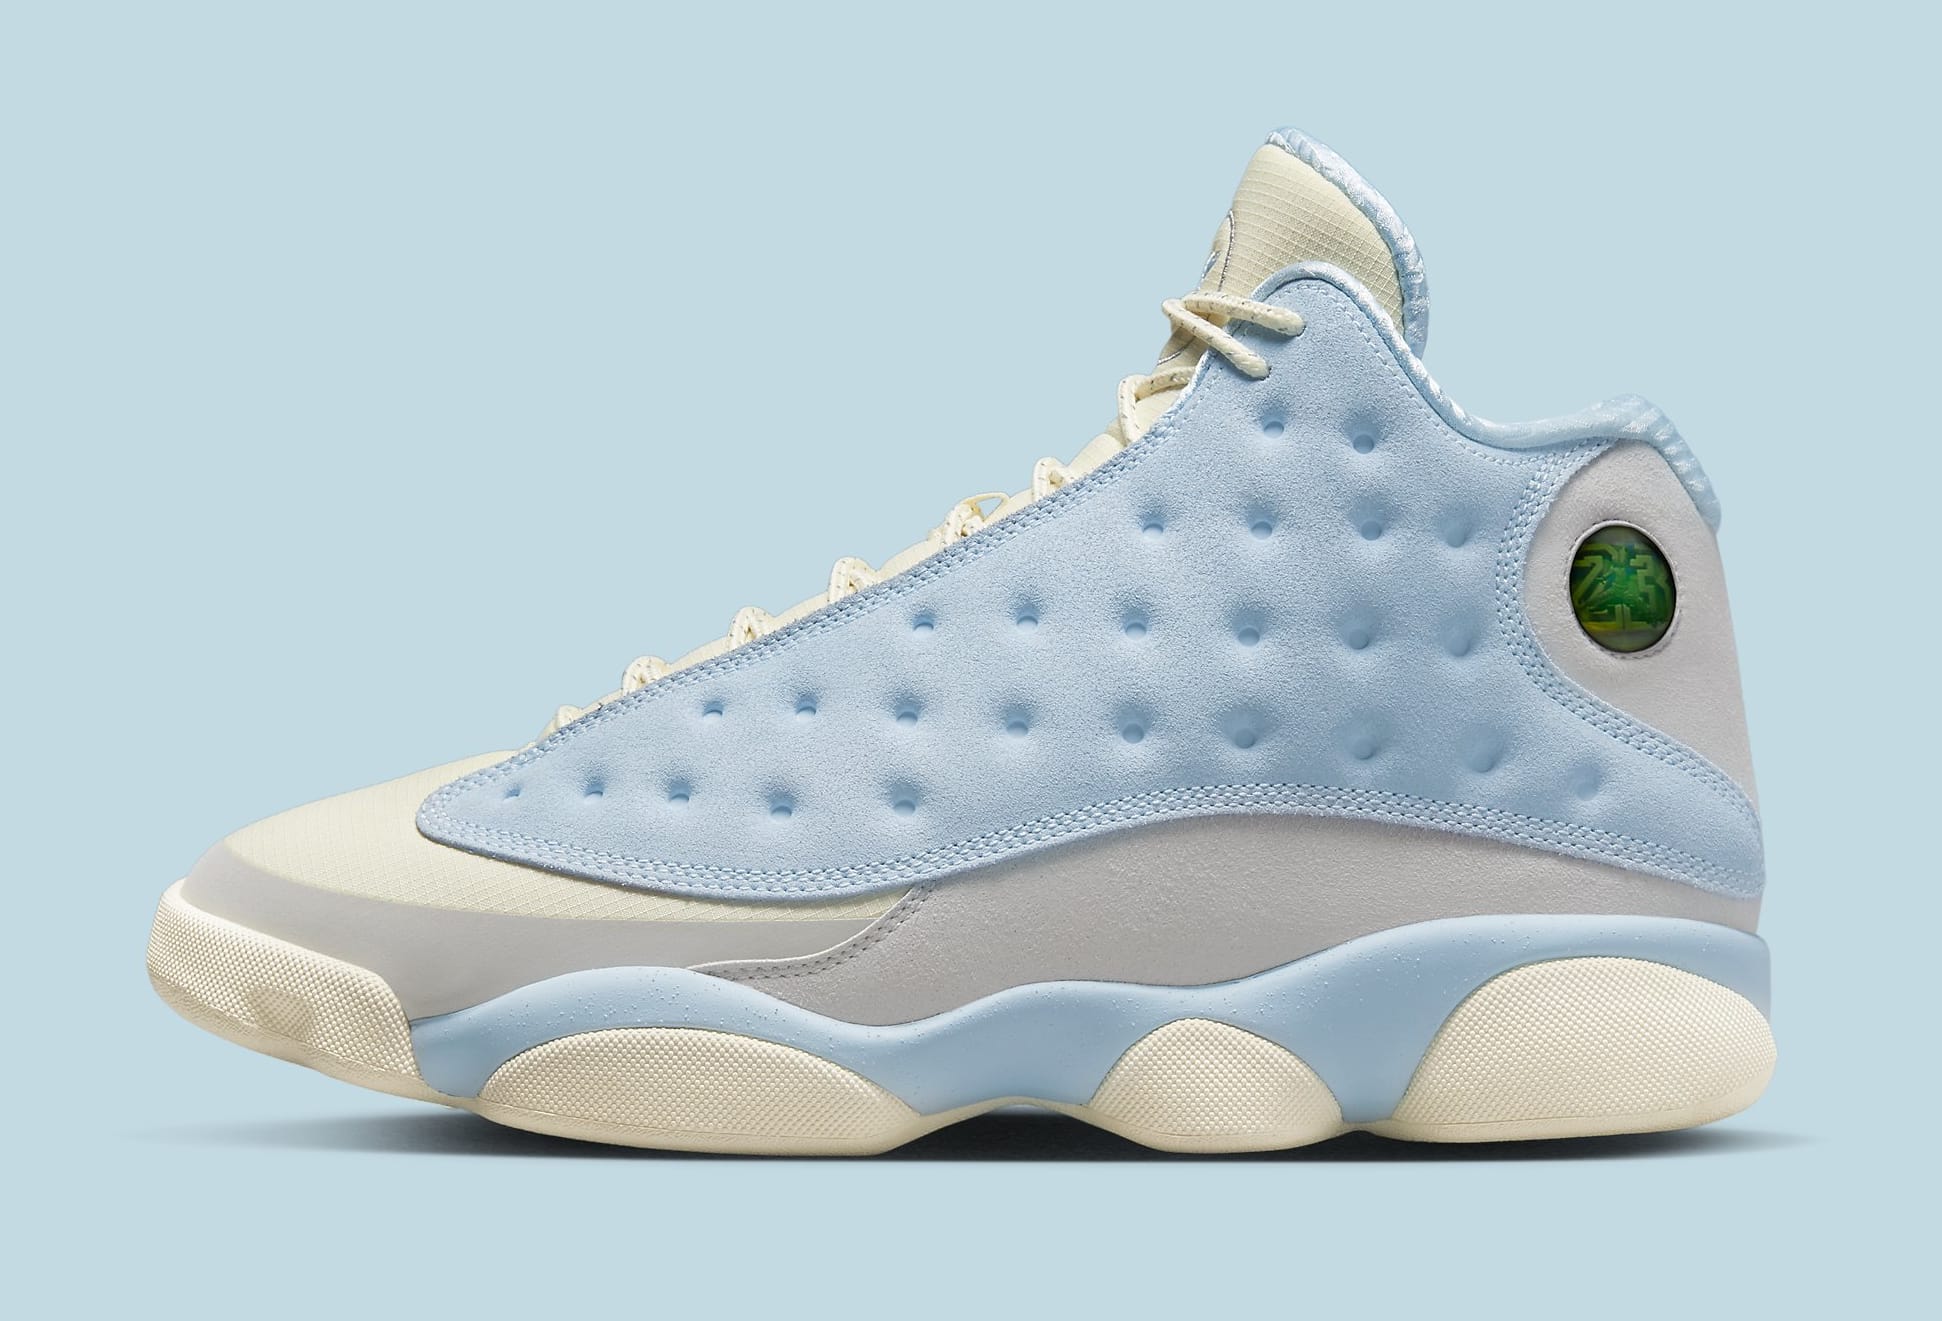 Solefly Air Jordan 13 Collab Dx5763 100 Lateral